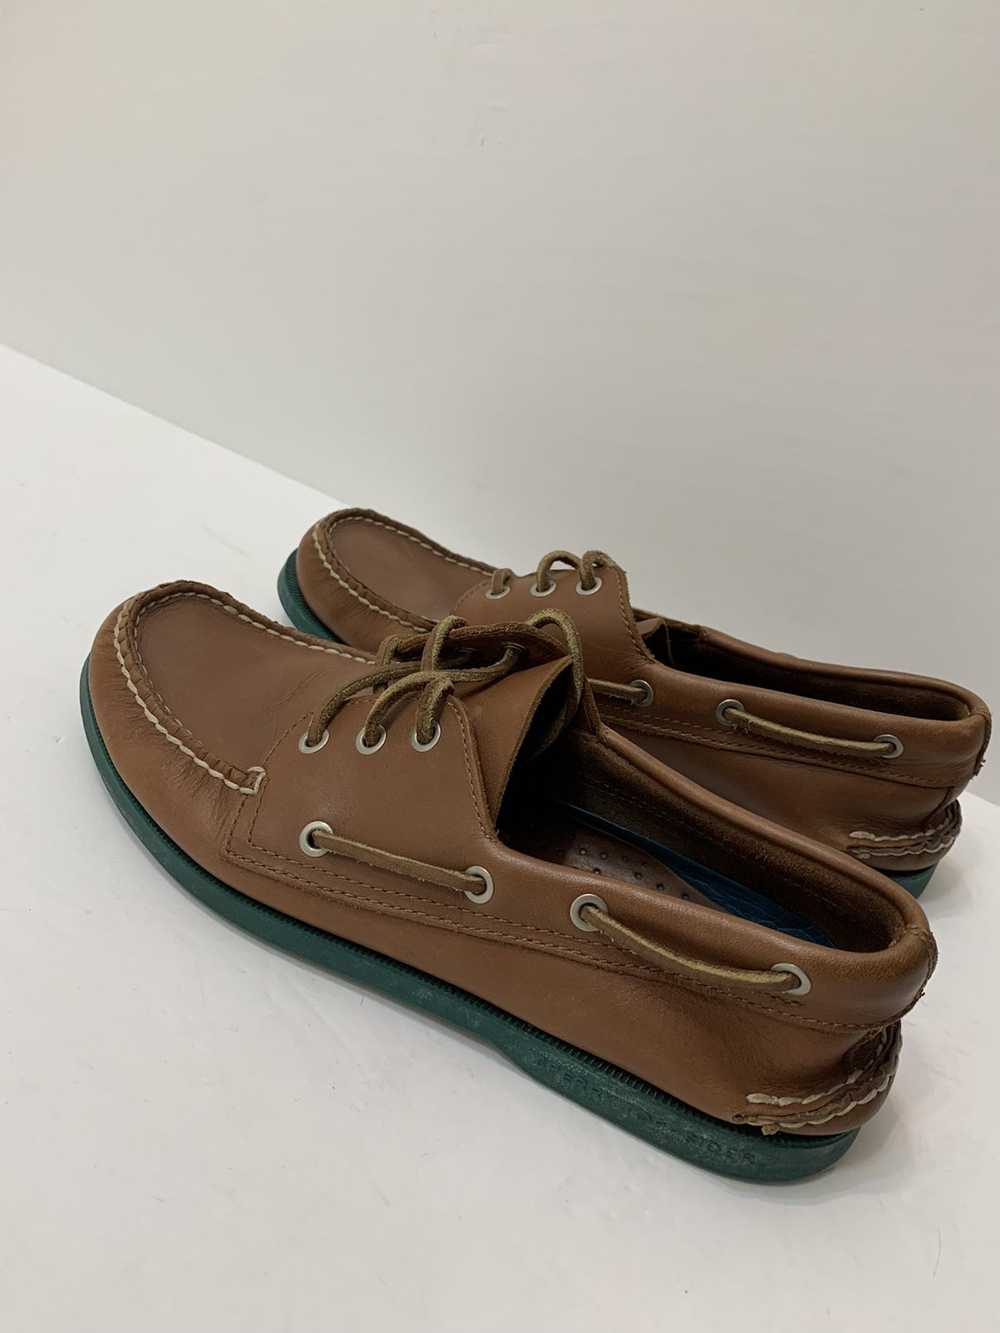 Sperry SPERRY TOP SIDER LEATHER BOAT SHOES - image 6